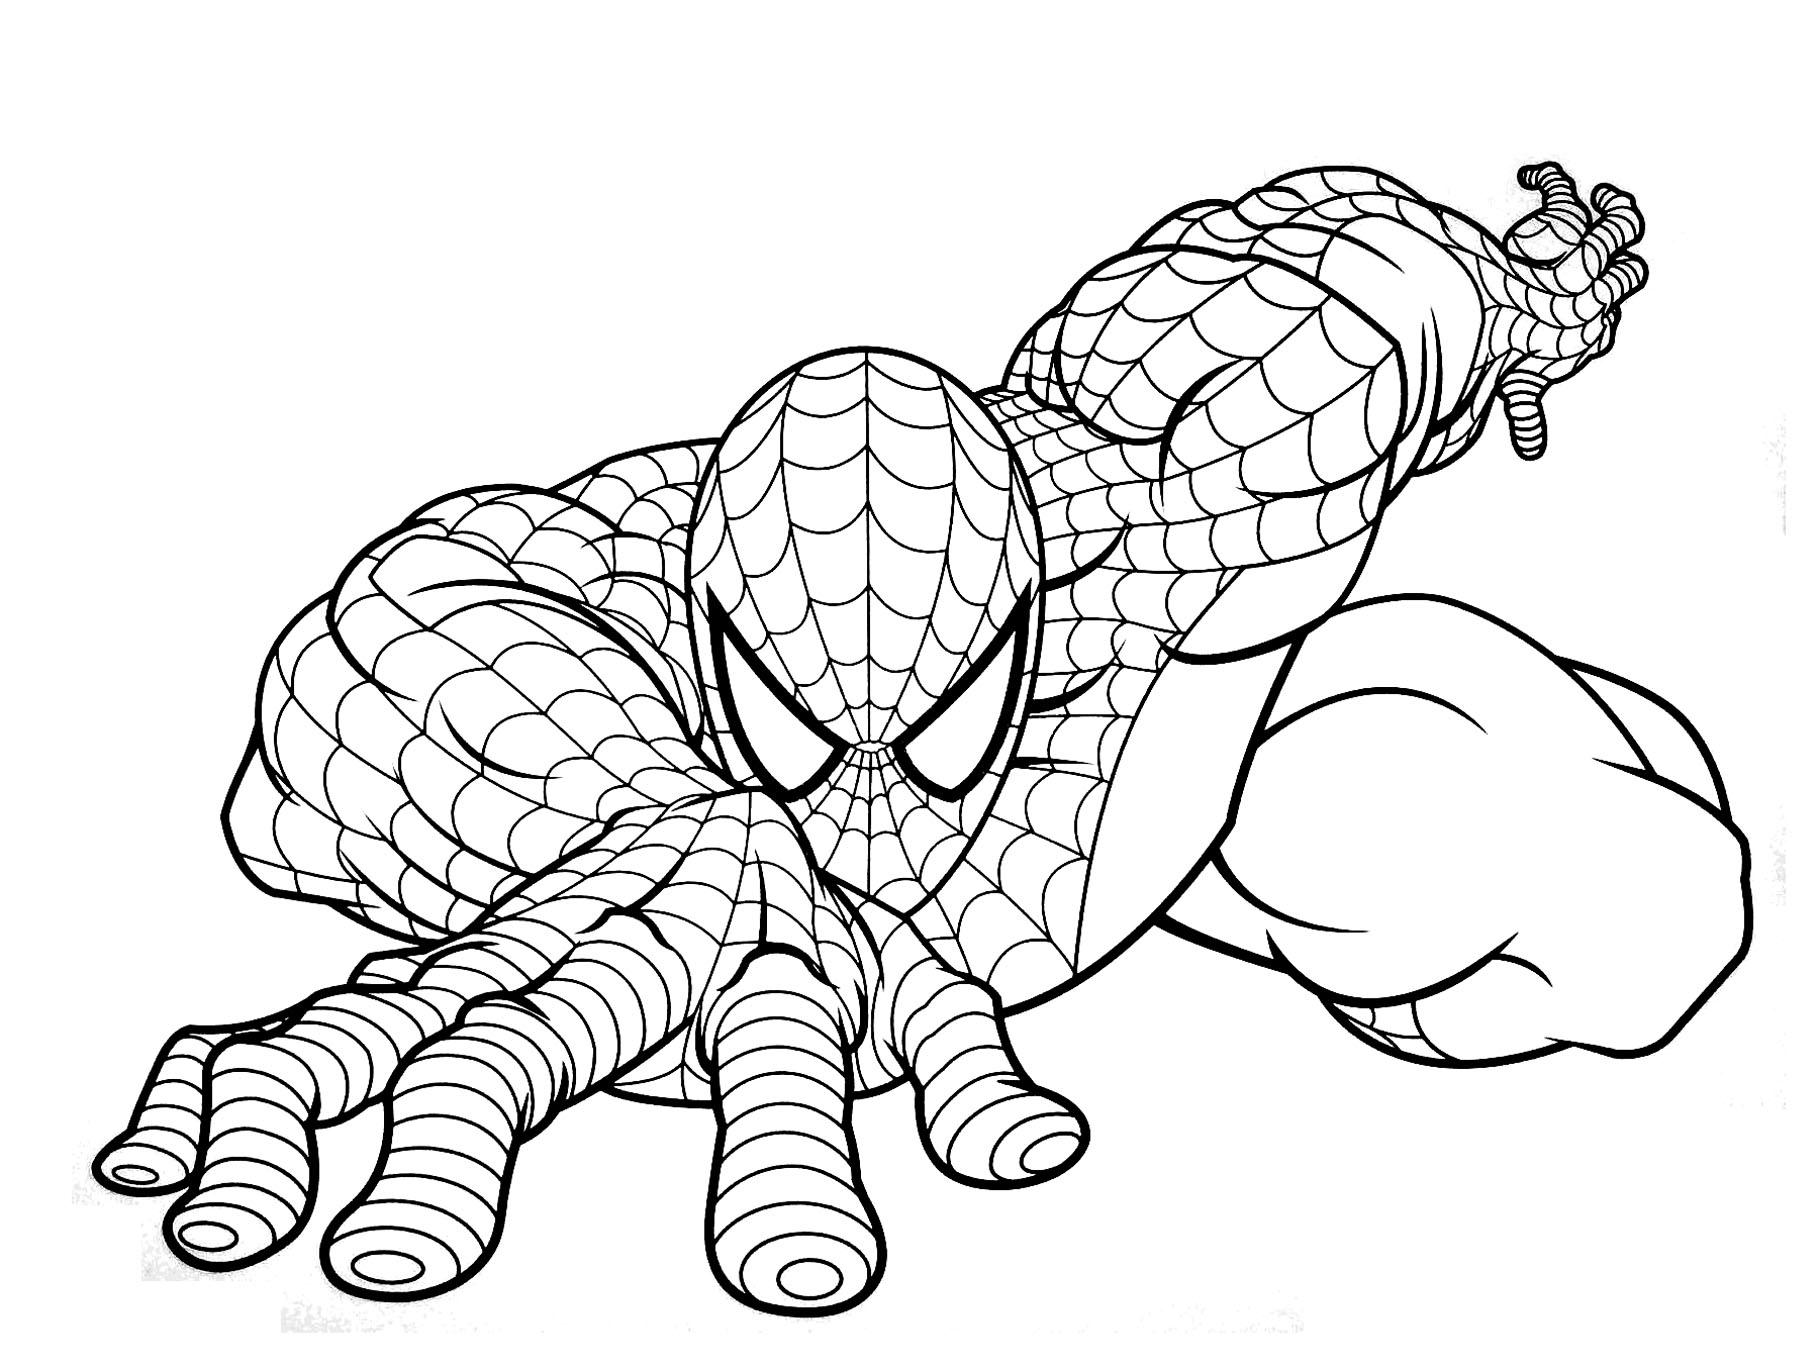 Lego Spiderman Drawing by Thomas Volpe - Fine Art America